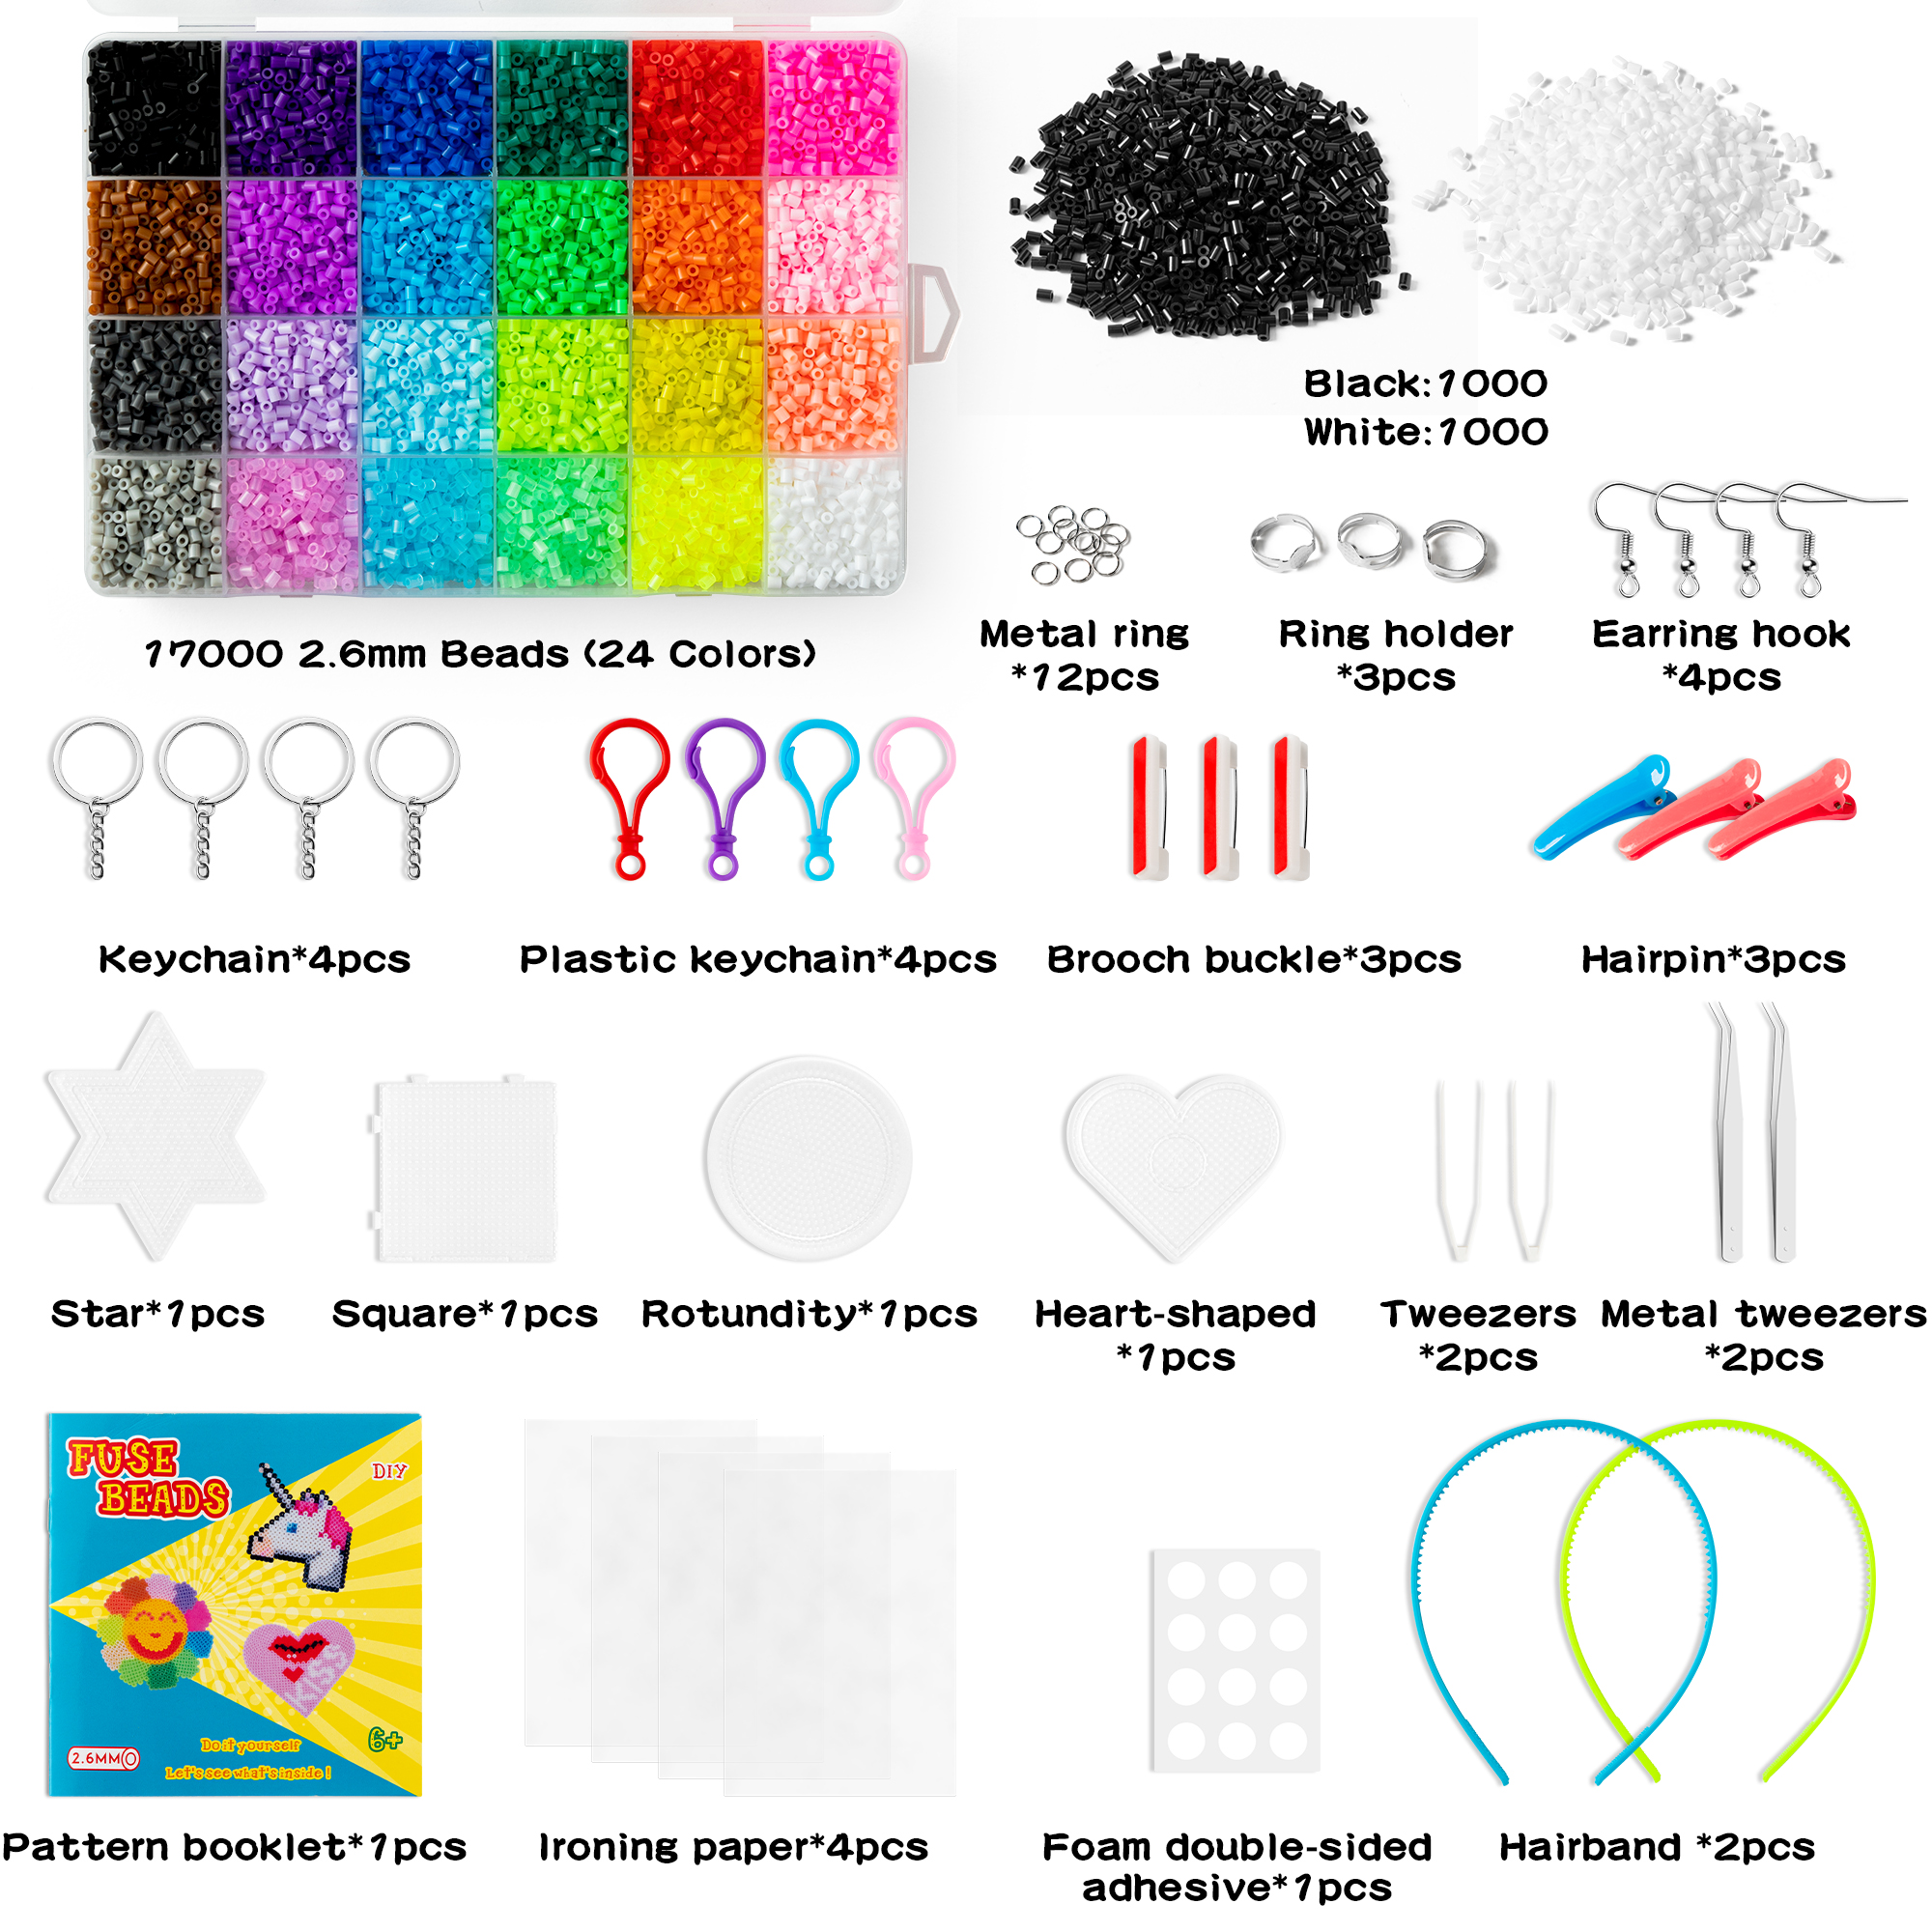 BUoonyer 17060Pcs Mini Fuse Beads Kit, Melting Beads Set for Kids Crafts,  Including 24 Colors 2.6mm Iron Beads, Pegboards, Ironing Papers, Tweezers,  Keychains, Hair Clips, Etc. Making Arts DIY Gift – BUoonyer